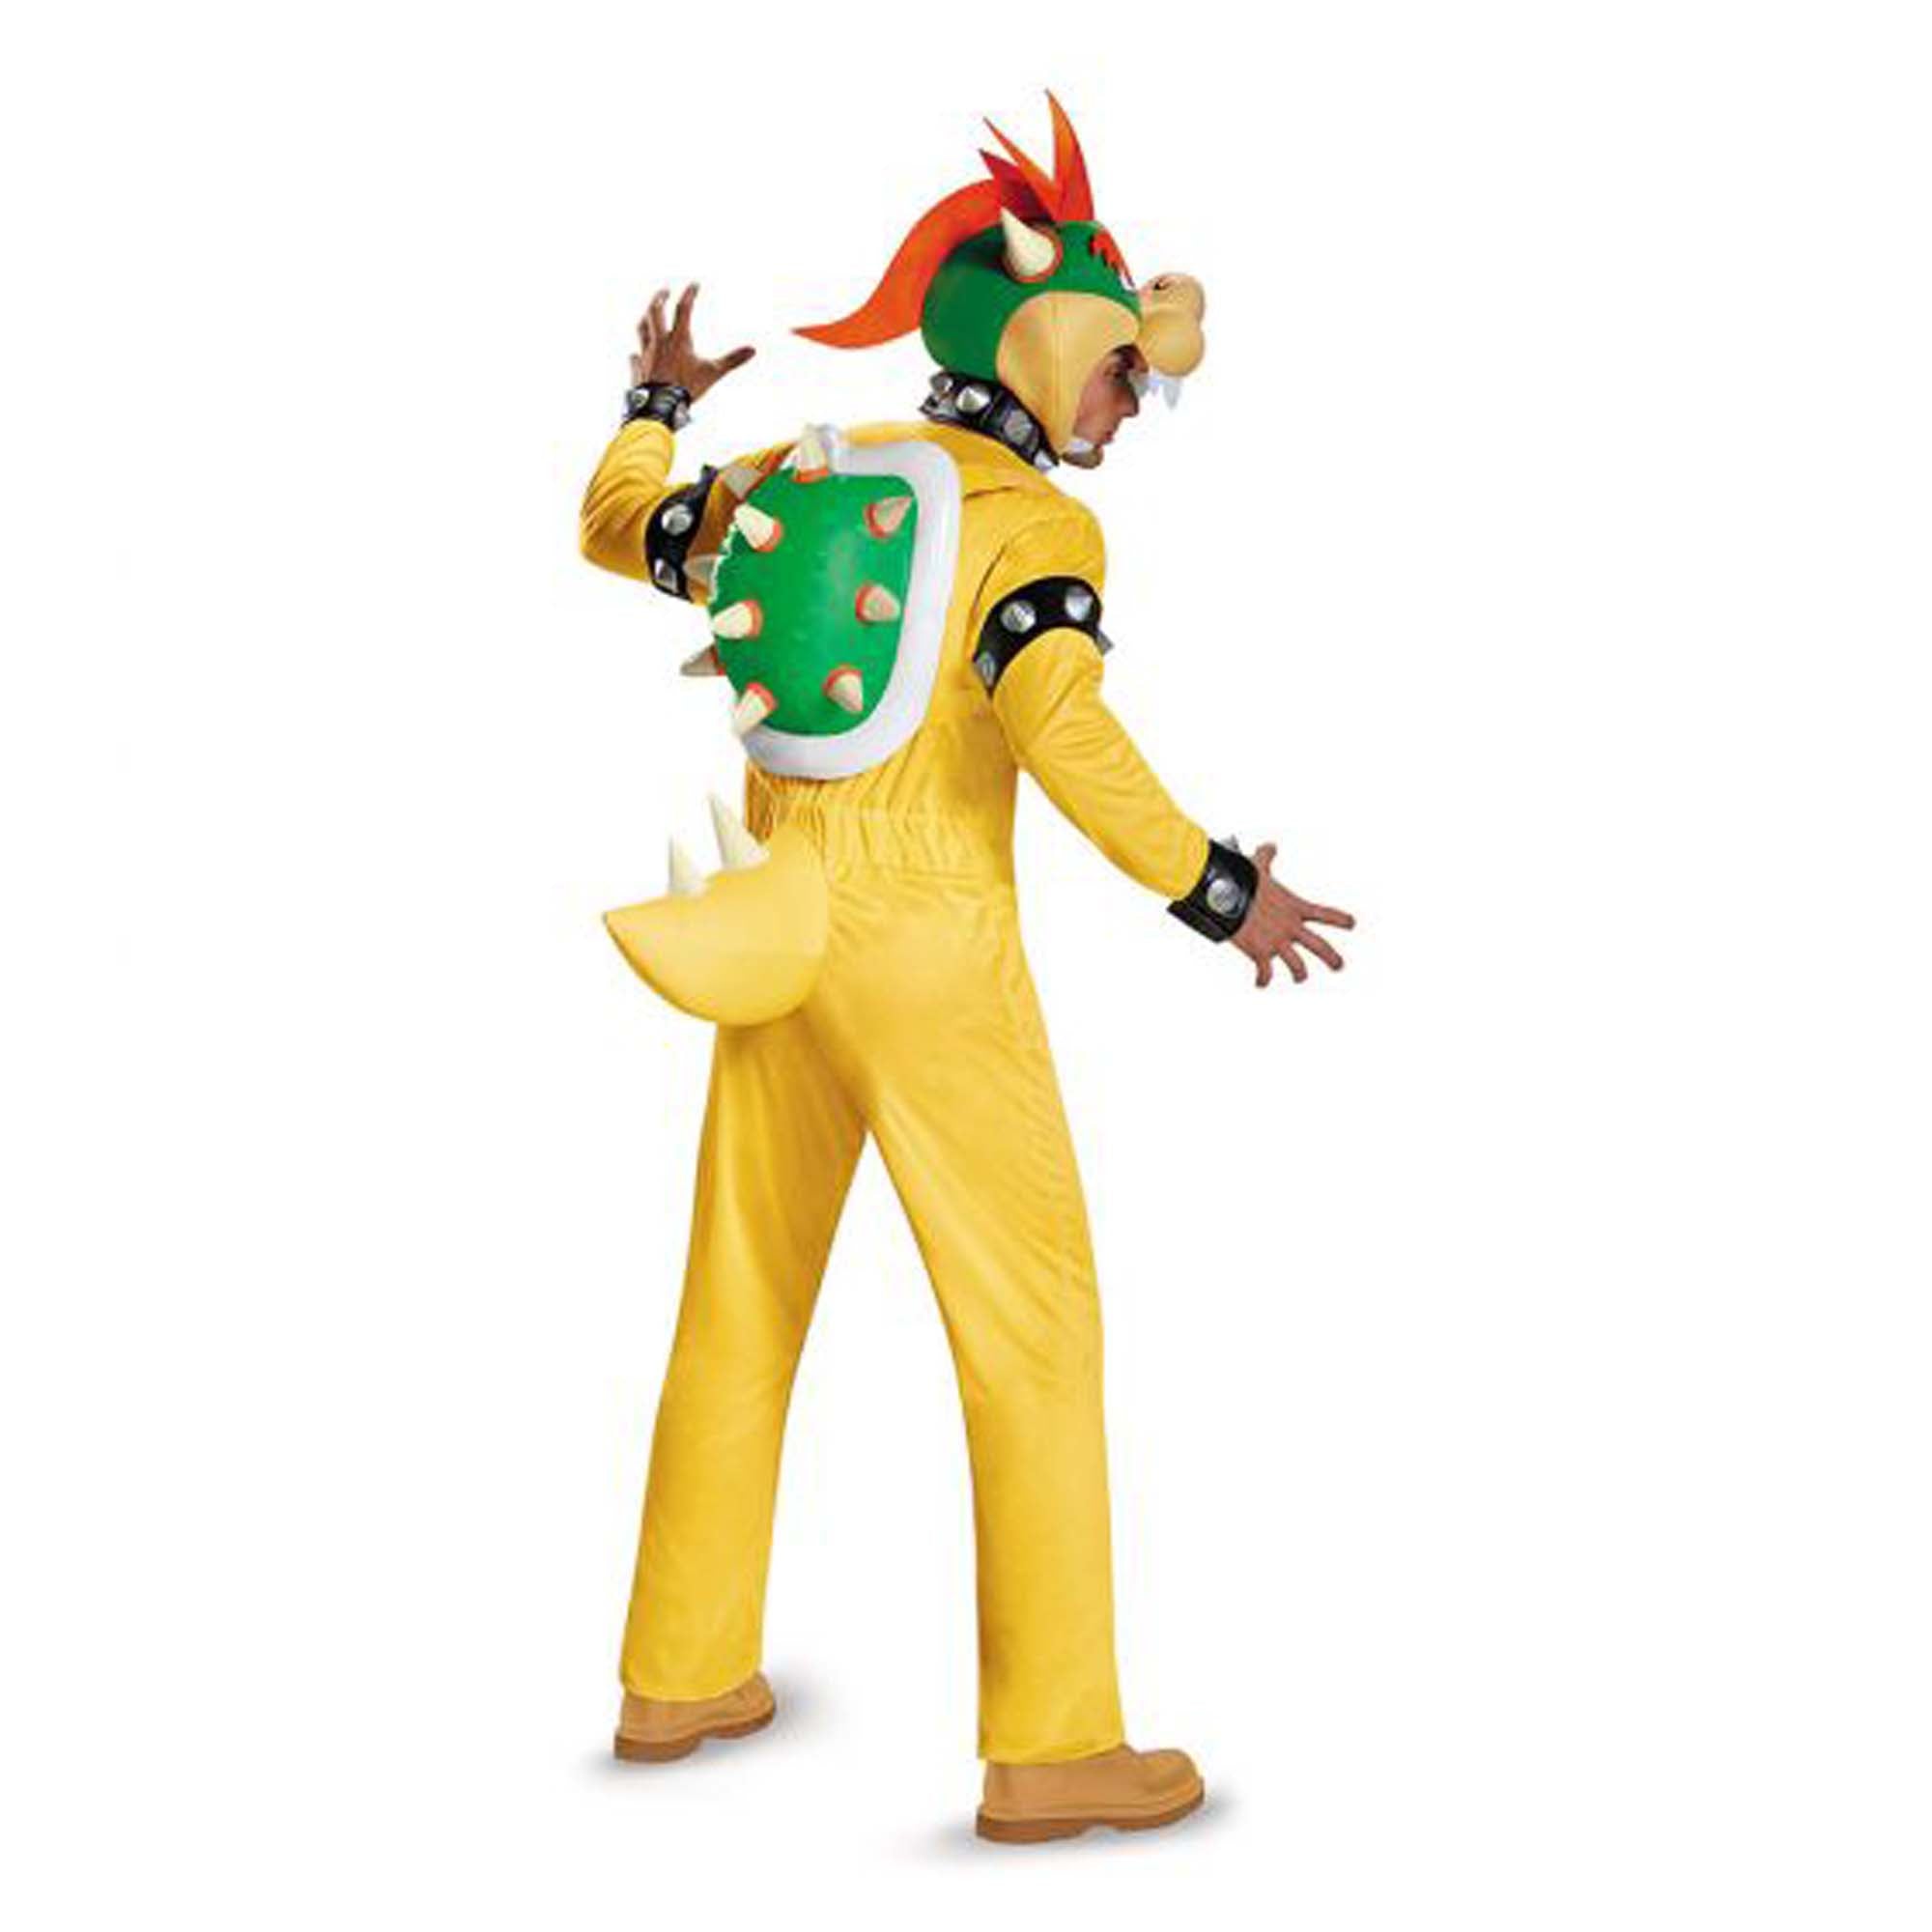 Adult Deluxe Super Mario Bros Green Yoshi Jumpsuit Costume SIZE XL